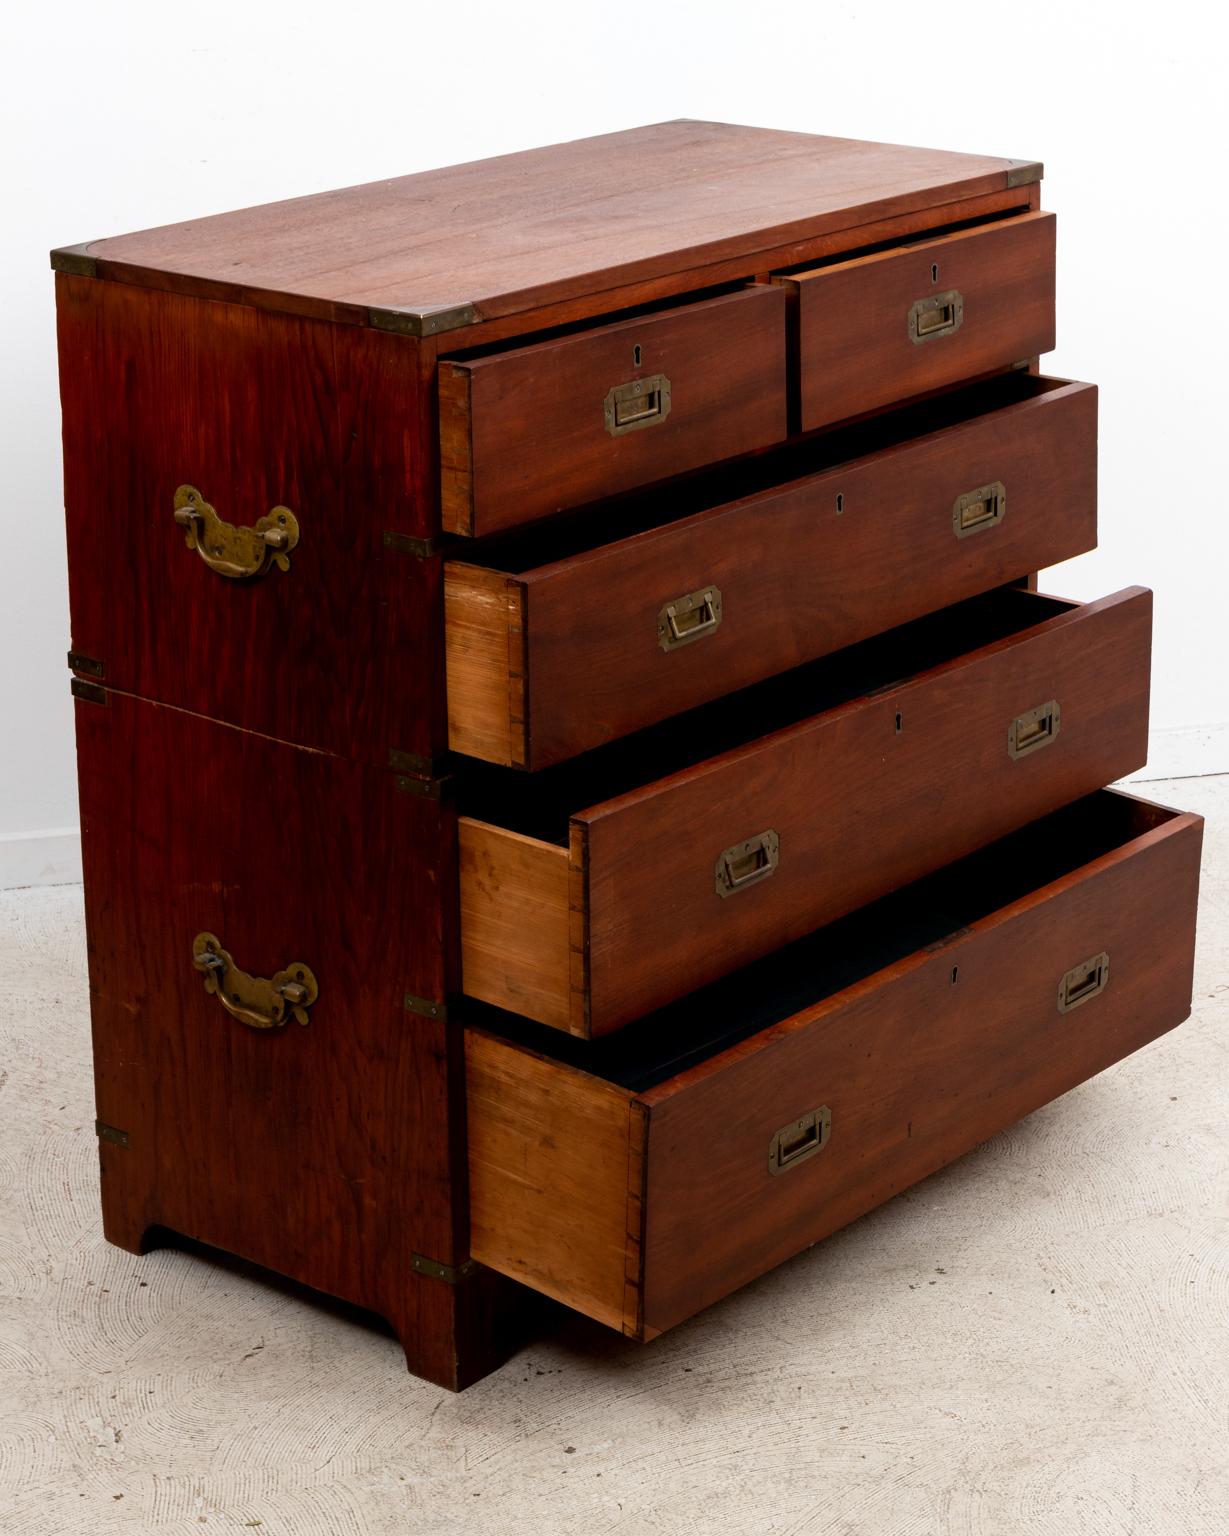 Circa mid 19th century two section English campaign chest on bracket feet and composed of teak and pine woods. The piece also features with recessed metal handles on the drawer fronts and bat's wing escutcheoned handles on the sides for portability.